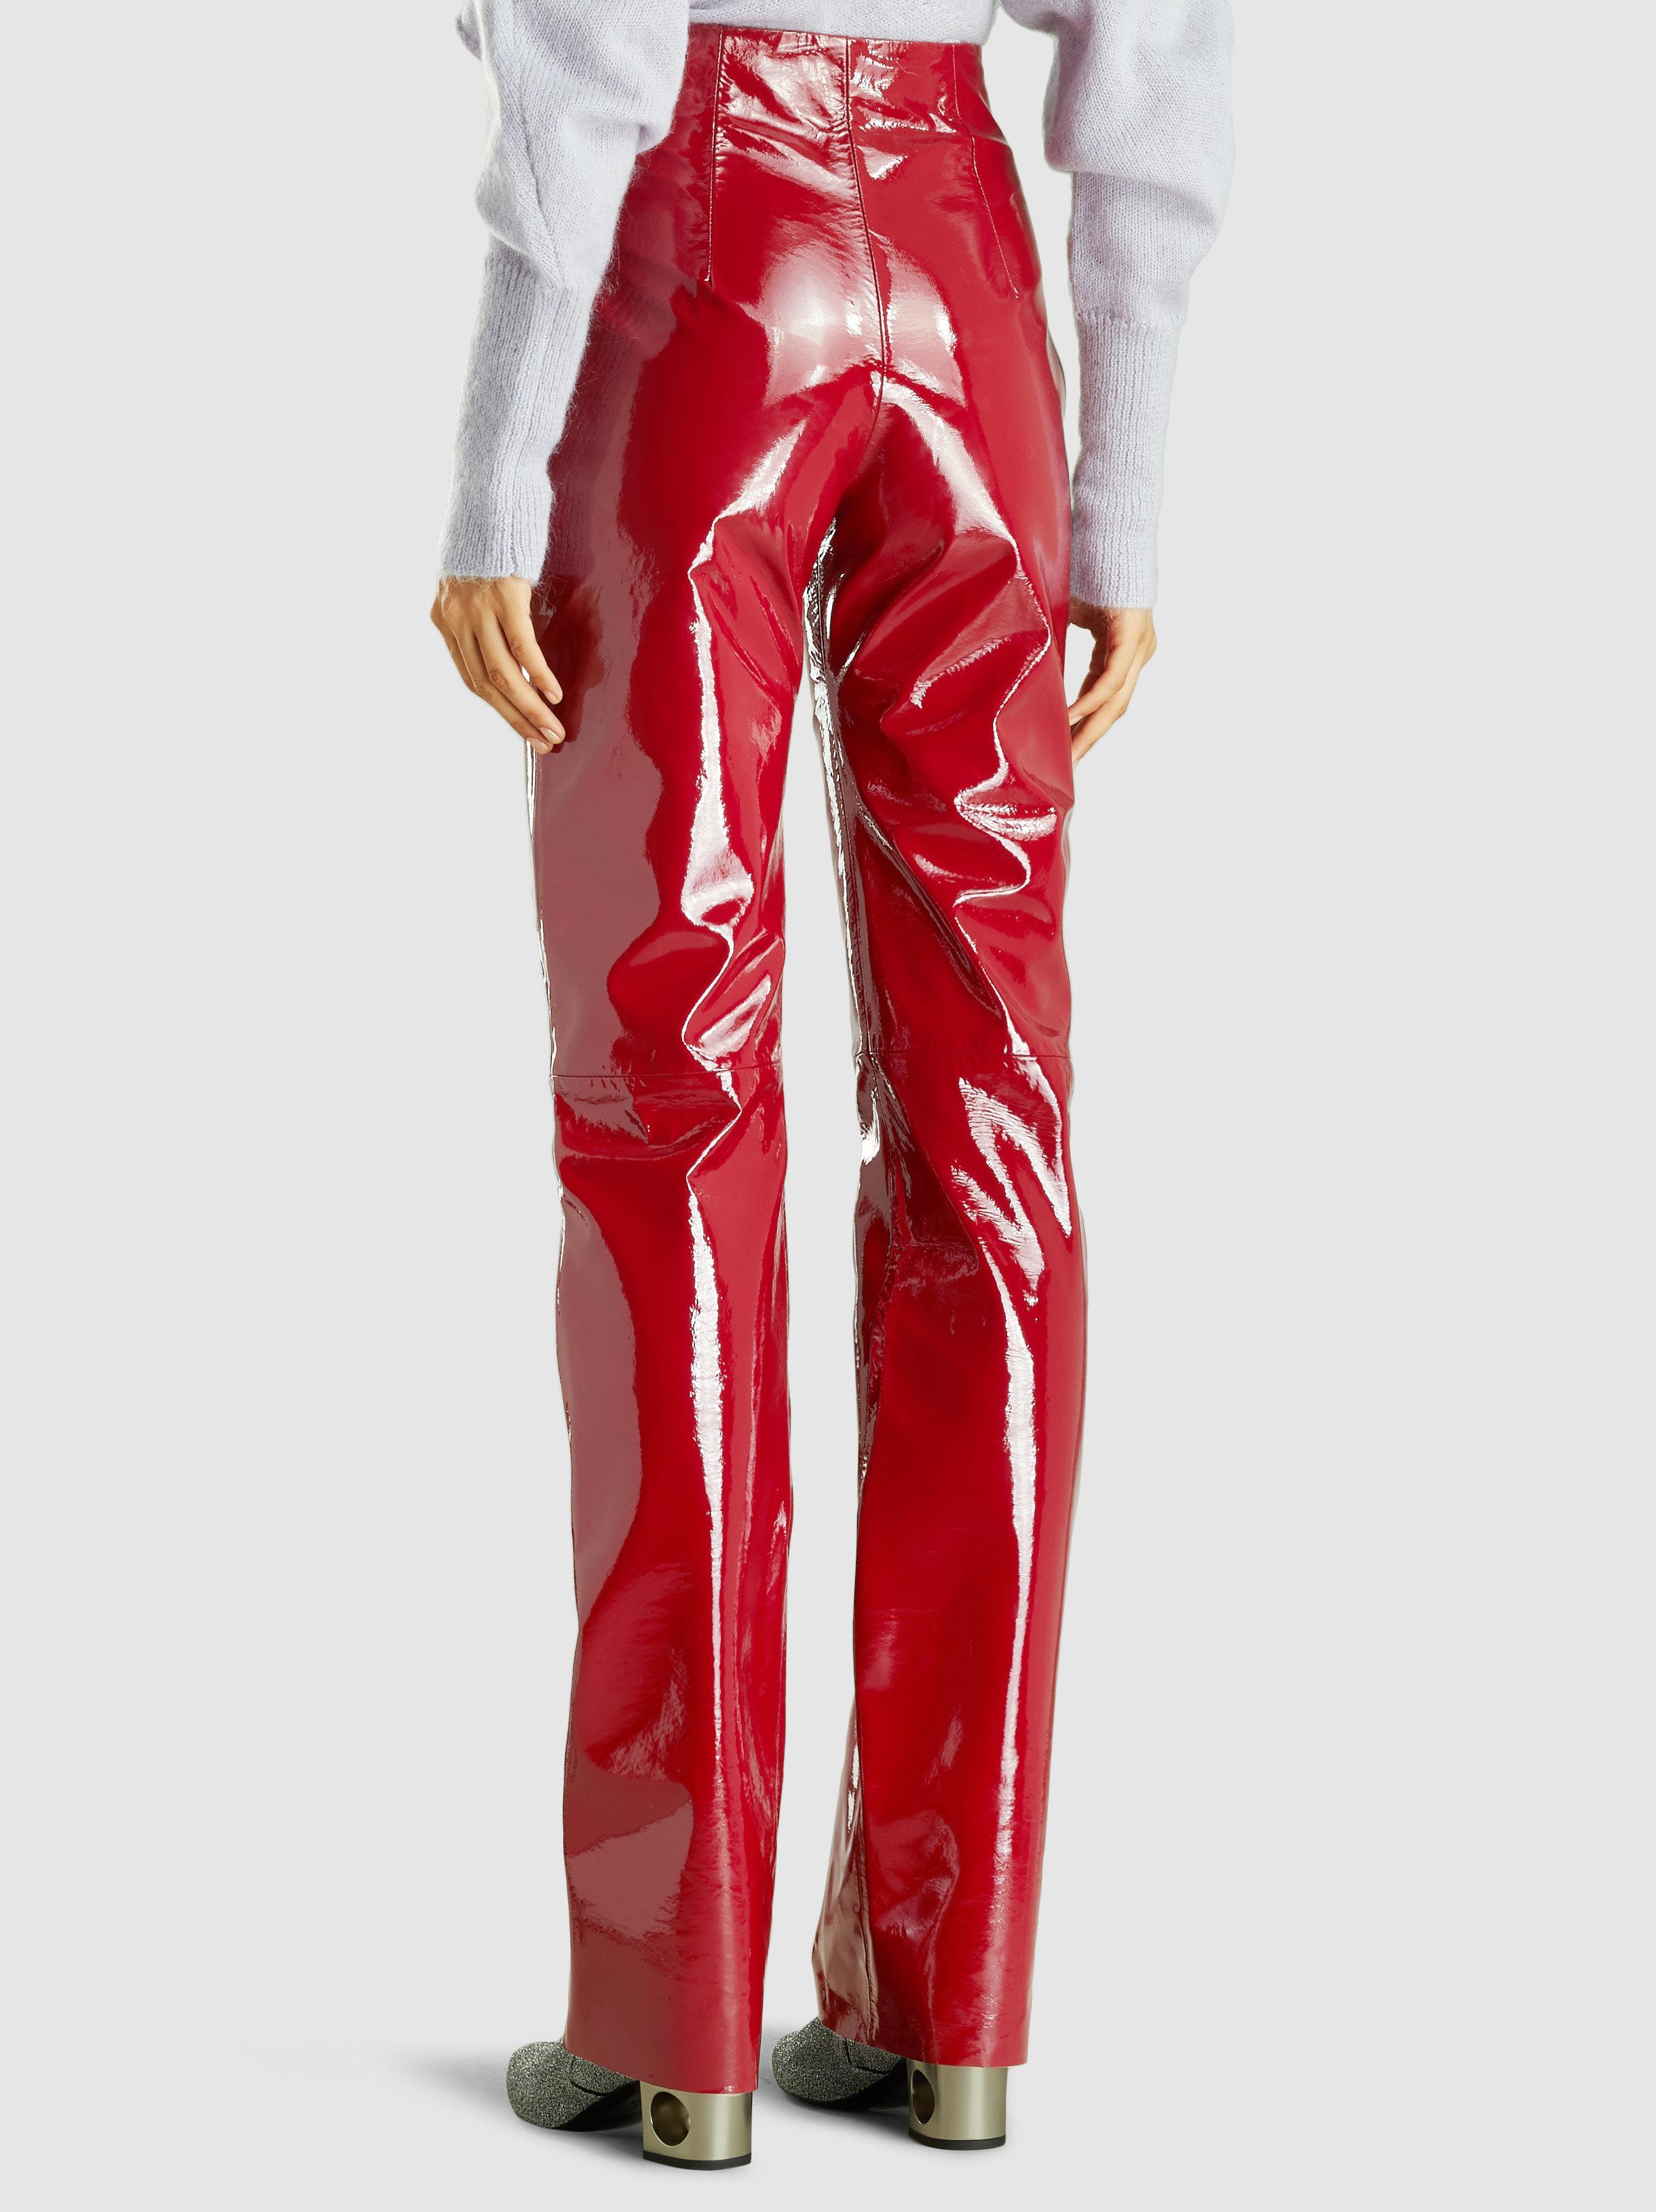 16Arlington High-rise Patent Leather Trousers in Red - Lyst